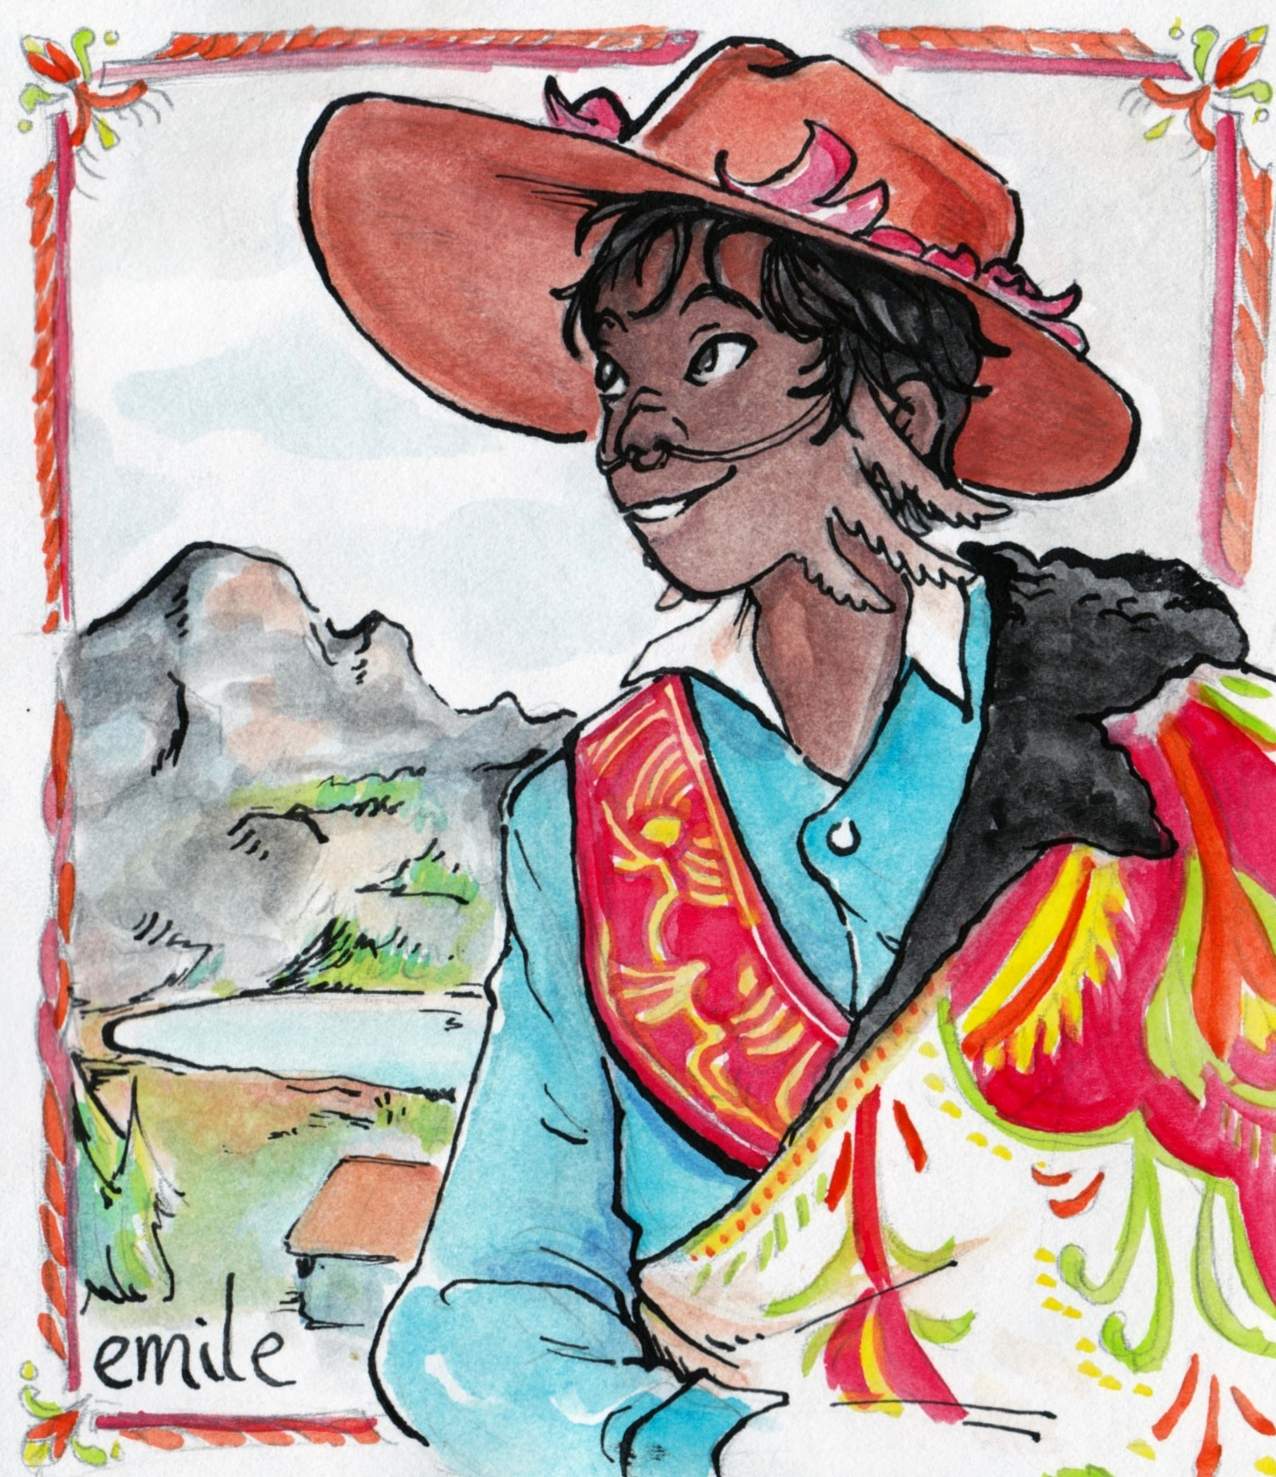 A watercolor portrait of Emile, a brown person, who sits smiling and looking to his left. He has a looped apparatus in his nostrils and curving around his cheeks and bearing axolotl-like gills on his cheeks. His black straight hair is cut short but falls out from under a wide-brimmed hat. He wears a blue collared shirt, and has both an embroidered cloak and red-and-yellow embroidered scarf falling over his shoulder. Mountains and lakes can be seen in the back.